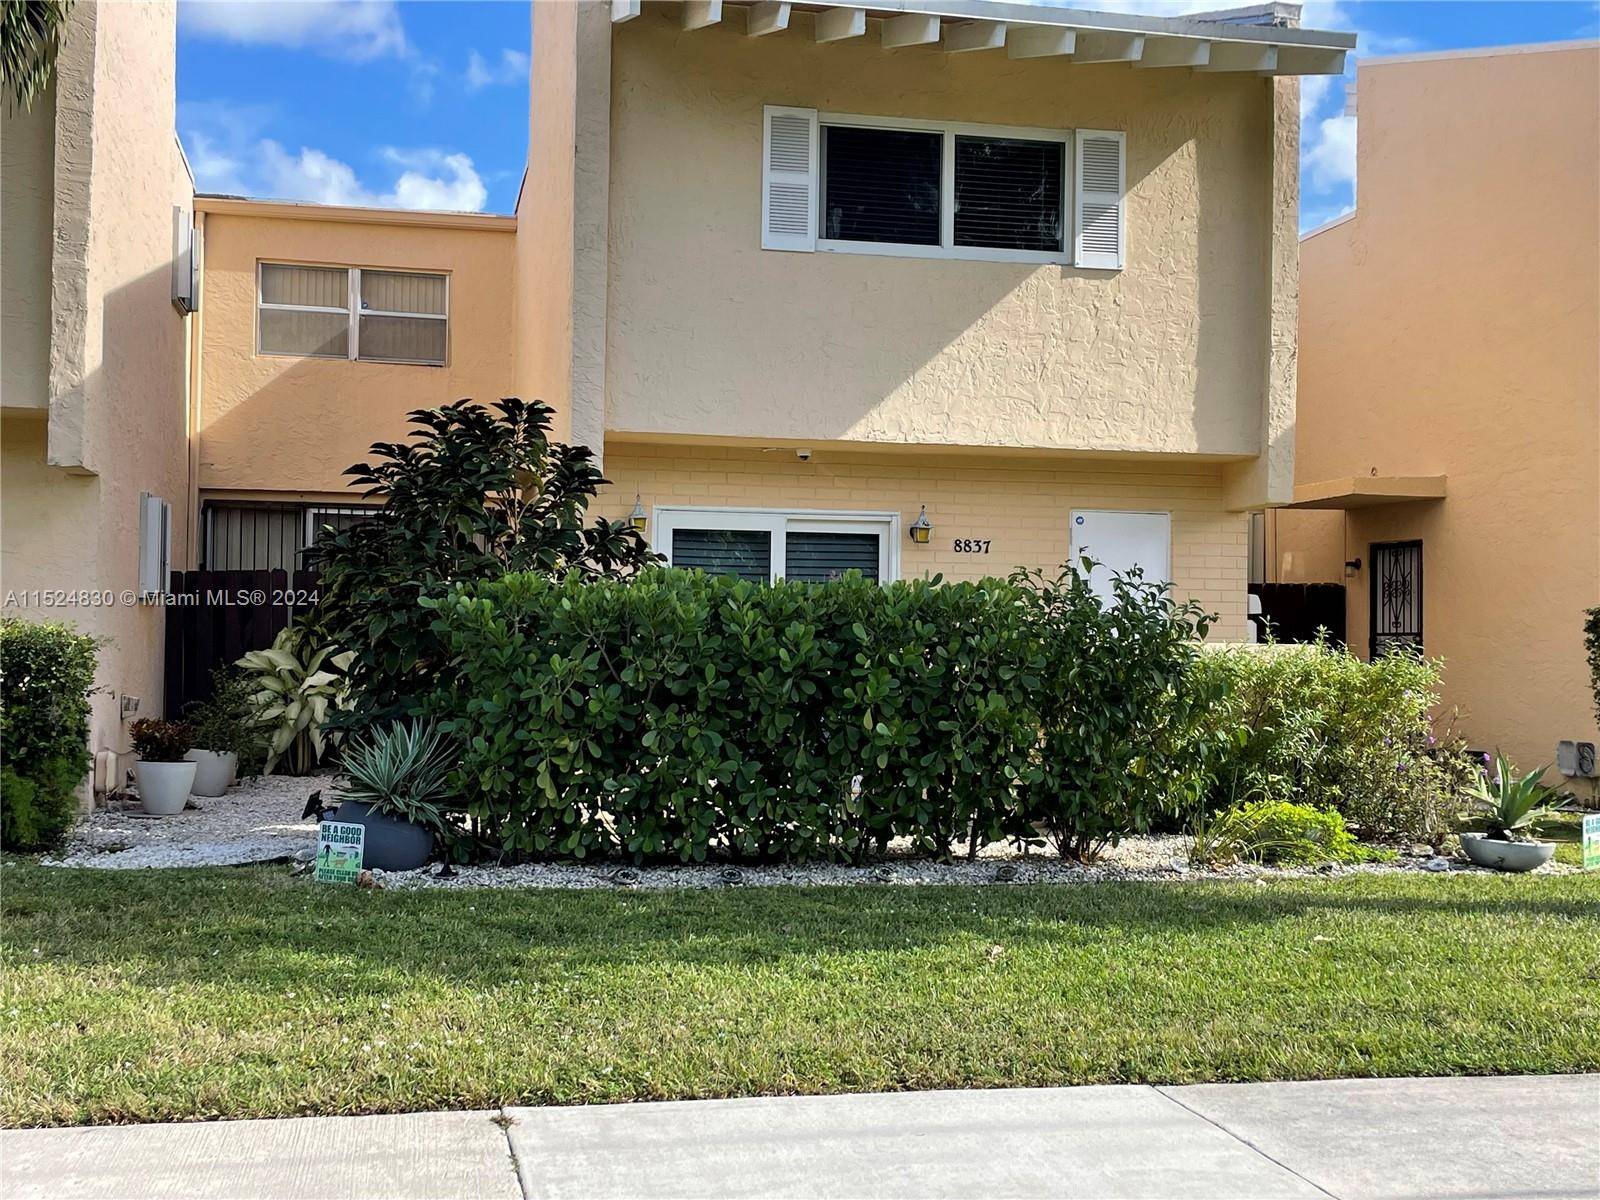 Completely remodeled townhome in desirable Miami Shores.